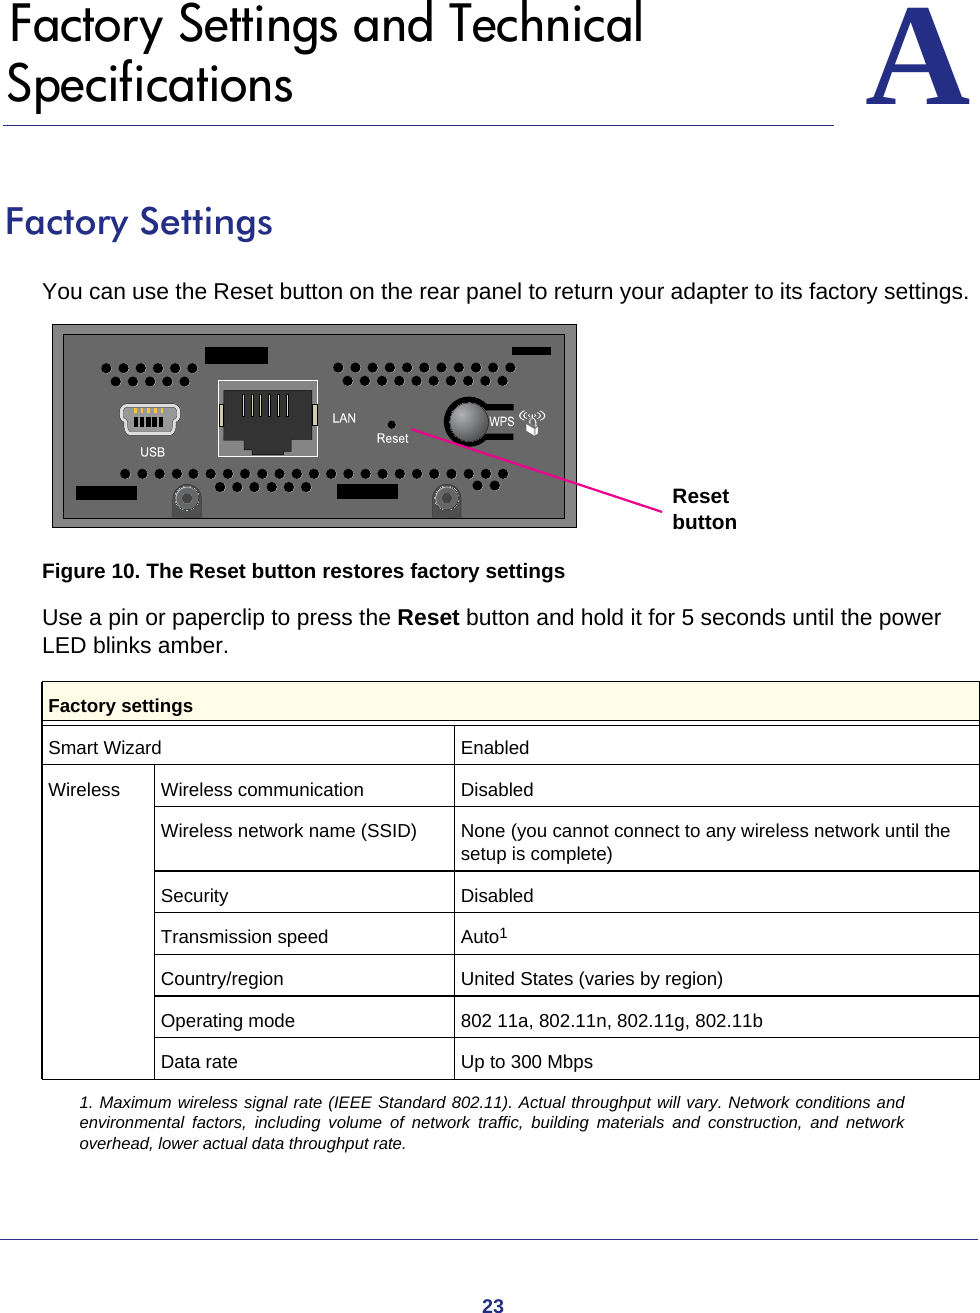 23AA.   Factory Settings and Technical SpecificationsFactory SettingsYou can use the Reset button on the rear panel to return your adapter to its factory settings. ResetbuttonFigure 10. The Reset button restores factory settingsUse a pin or paperclip to press the Reset button and hold it for 5 seconds until the power LED blinks amber.Factory settingsSmart Wizard EnabledWireless Wireless communication Disabled Wireless network name (SSID) None (you cannot connect to any wireless network until the setup is complete)Security DisabledTransmission speed Auto11. Maximum wireless signal rate (IEEE Standard 802.11). Actual throughput will vary. Network conditions and environmental factors, including volume of network traffic, building materials and construction, and network overhead, lower actual data throughput rate.Country/region United States (varies by region)Operating mode 802 11a, 802.11n, 802.11g, 802.11bData rate Up to 300 Mbps